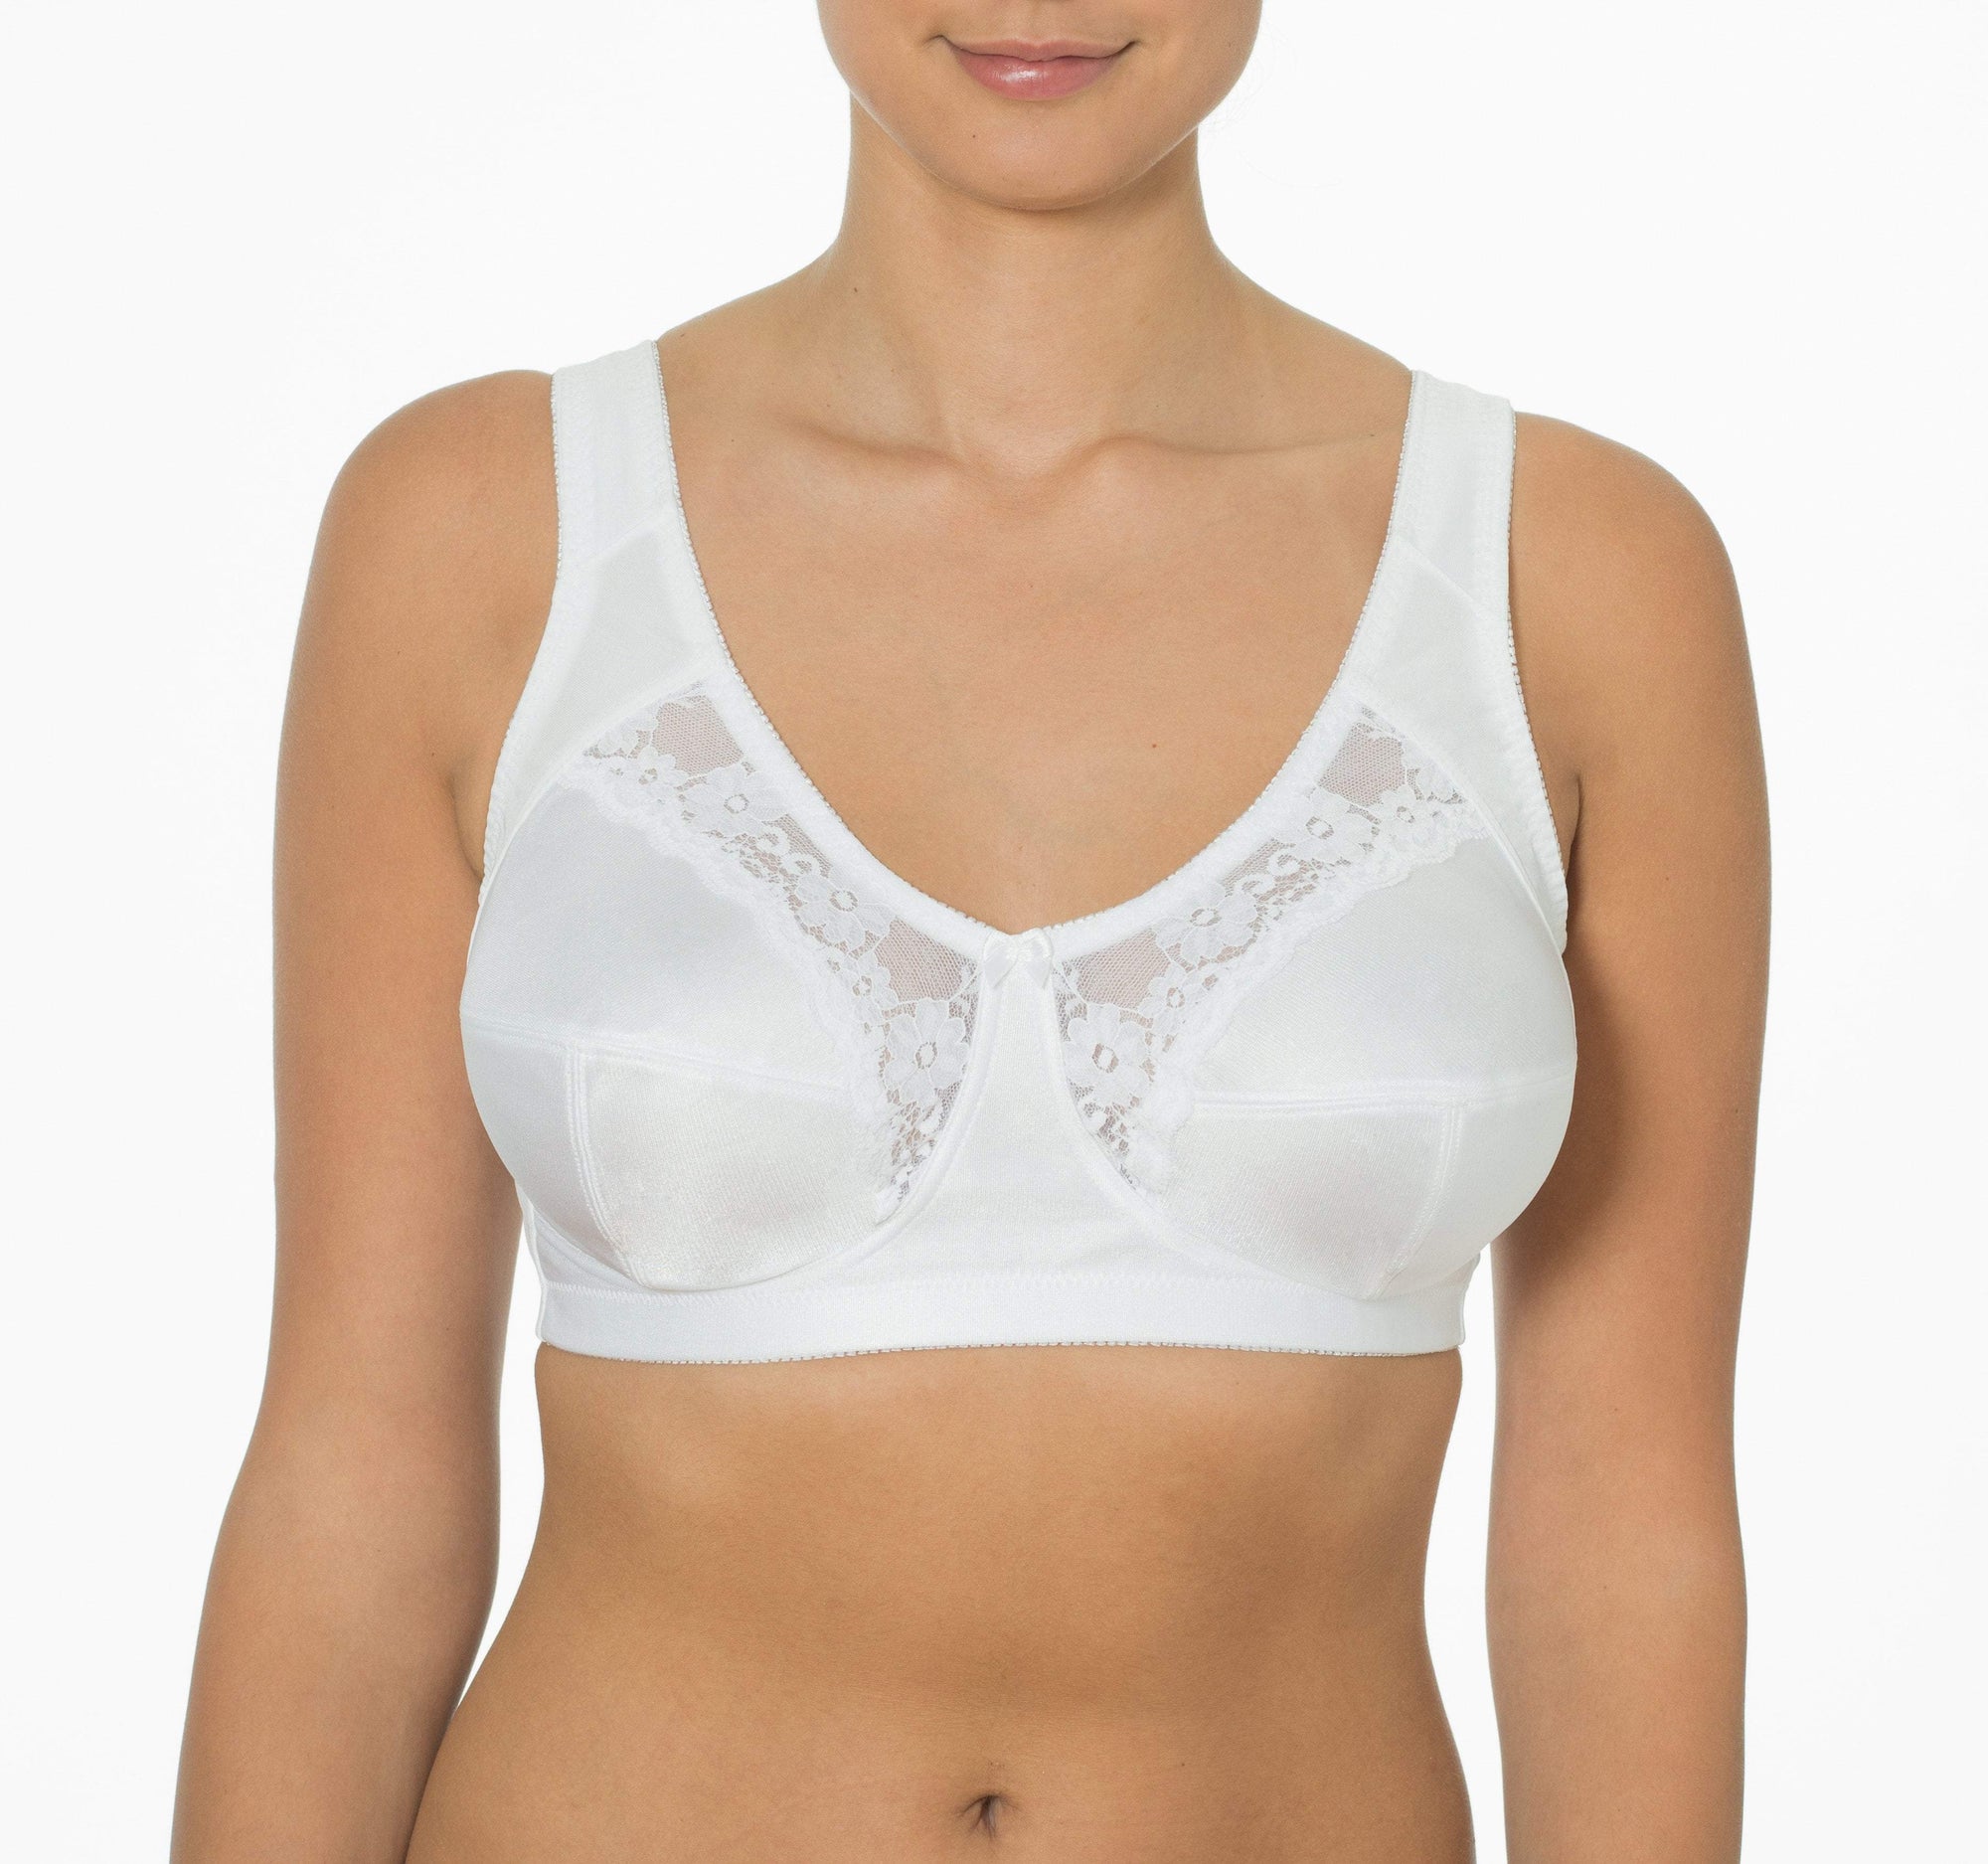 Cortland Style 7103 - Banded Full Figure Soft Cup Bra with Lace